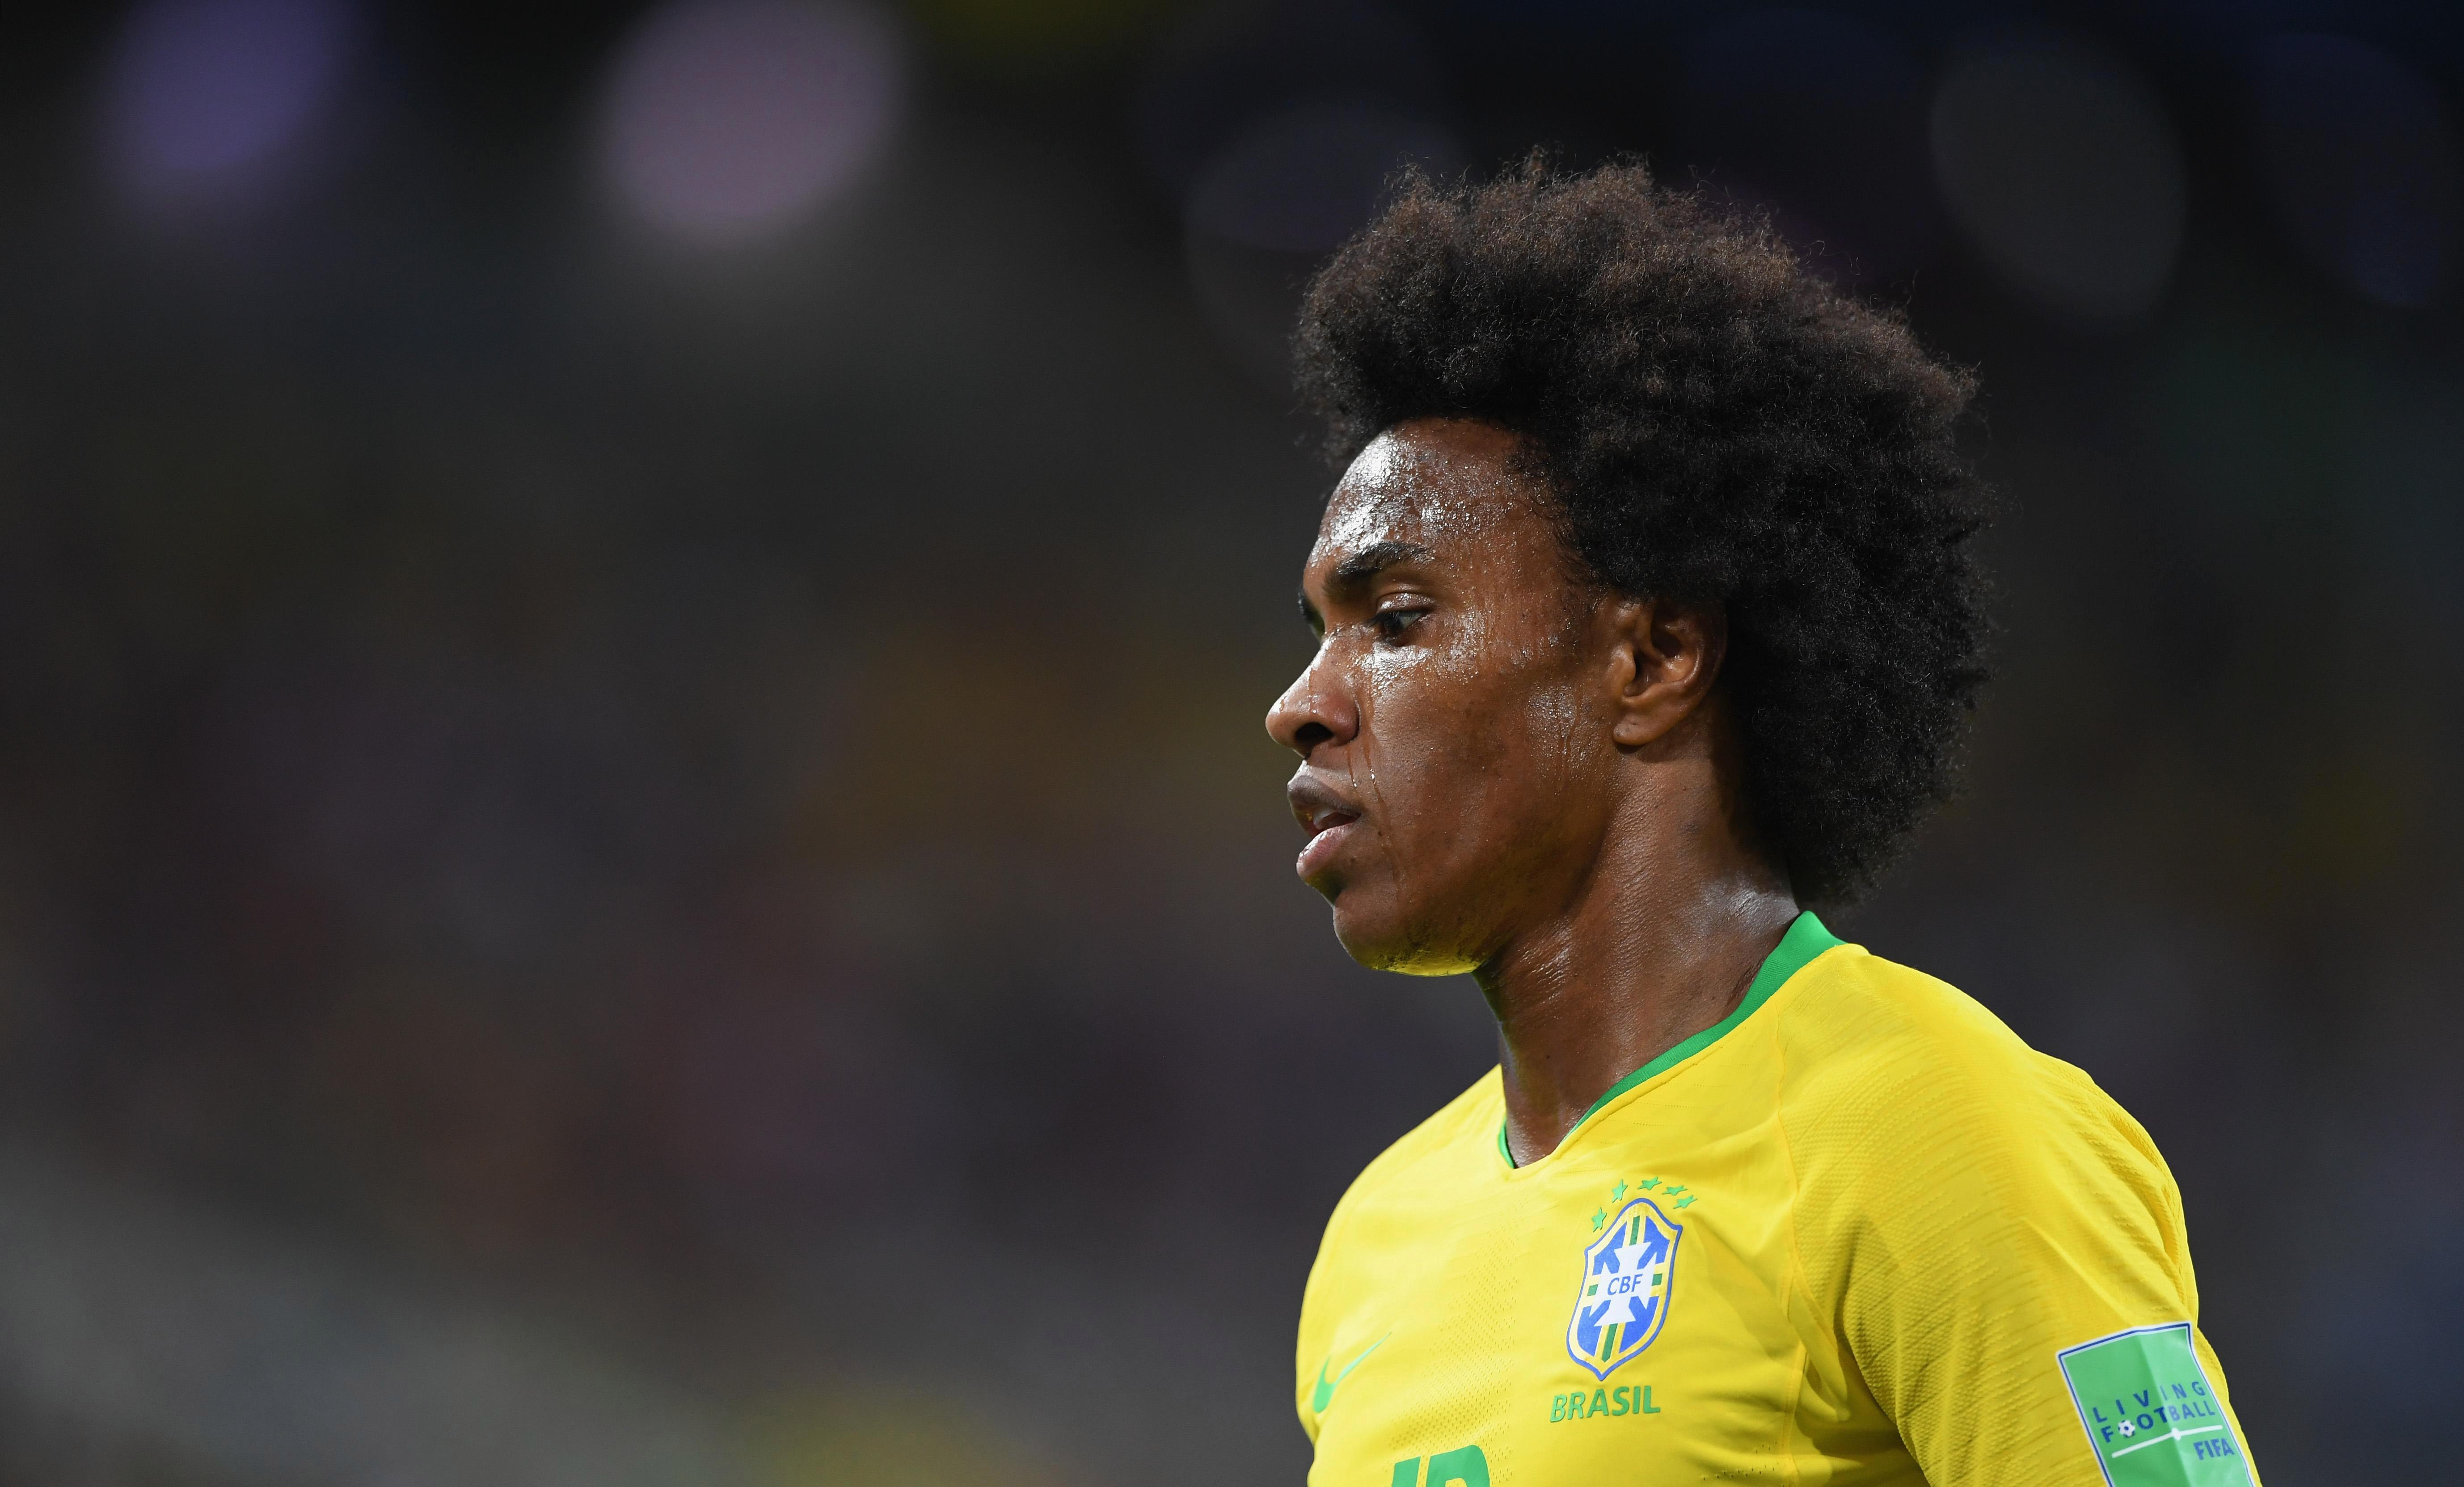 Chelsea slap huge £70m price tag on Brazil star Willian amid interest from Manchester United and Barcelona